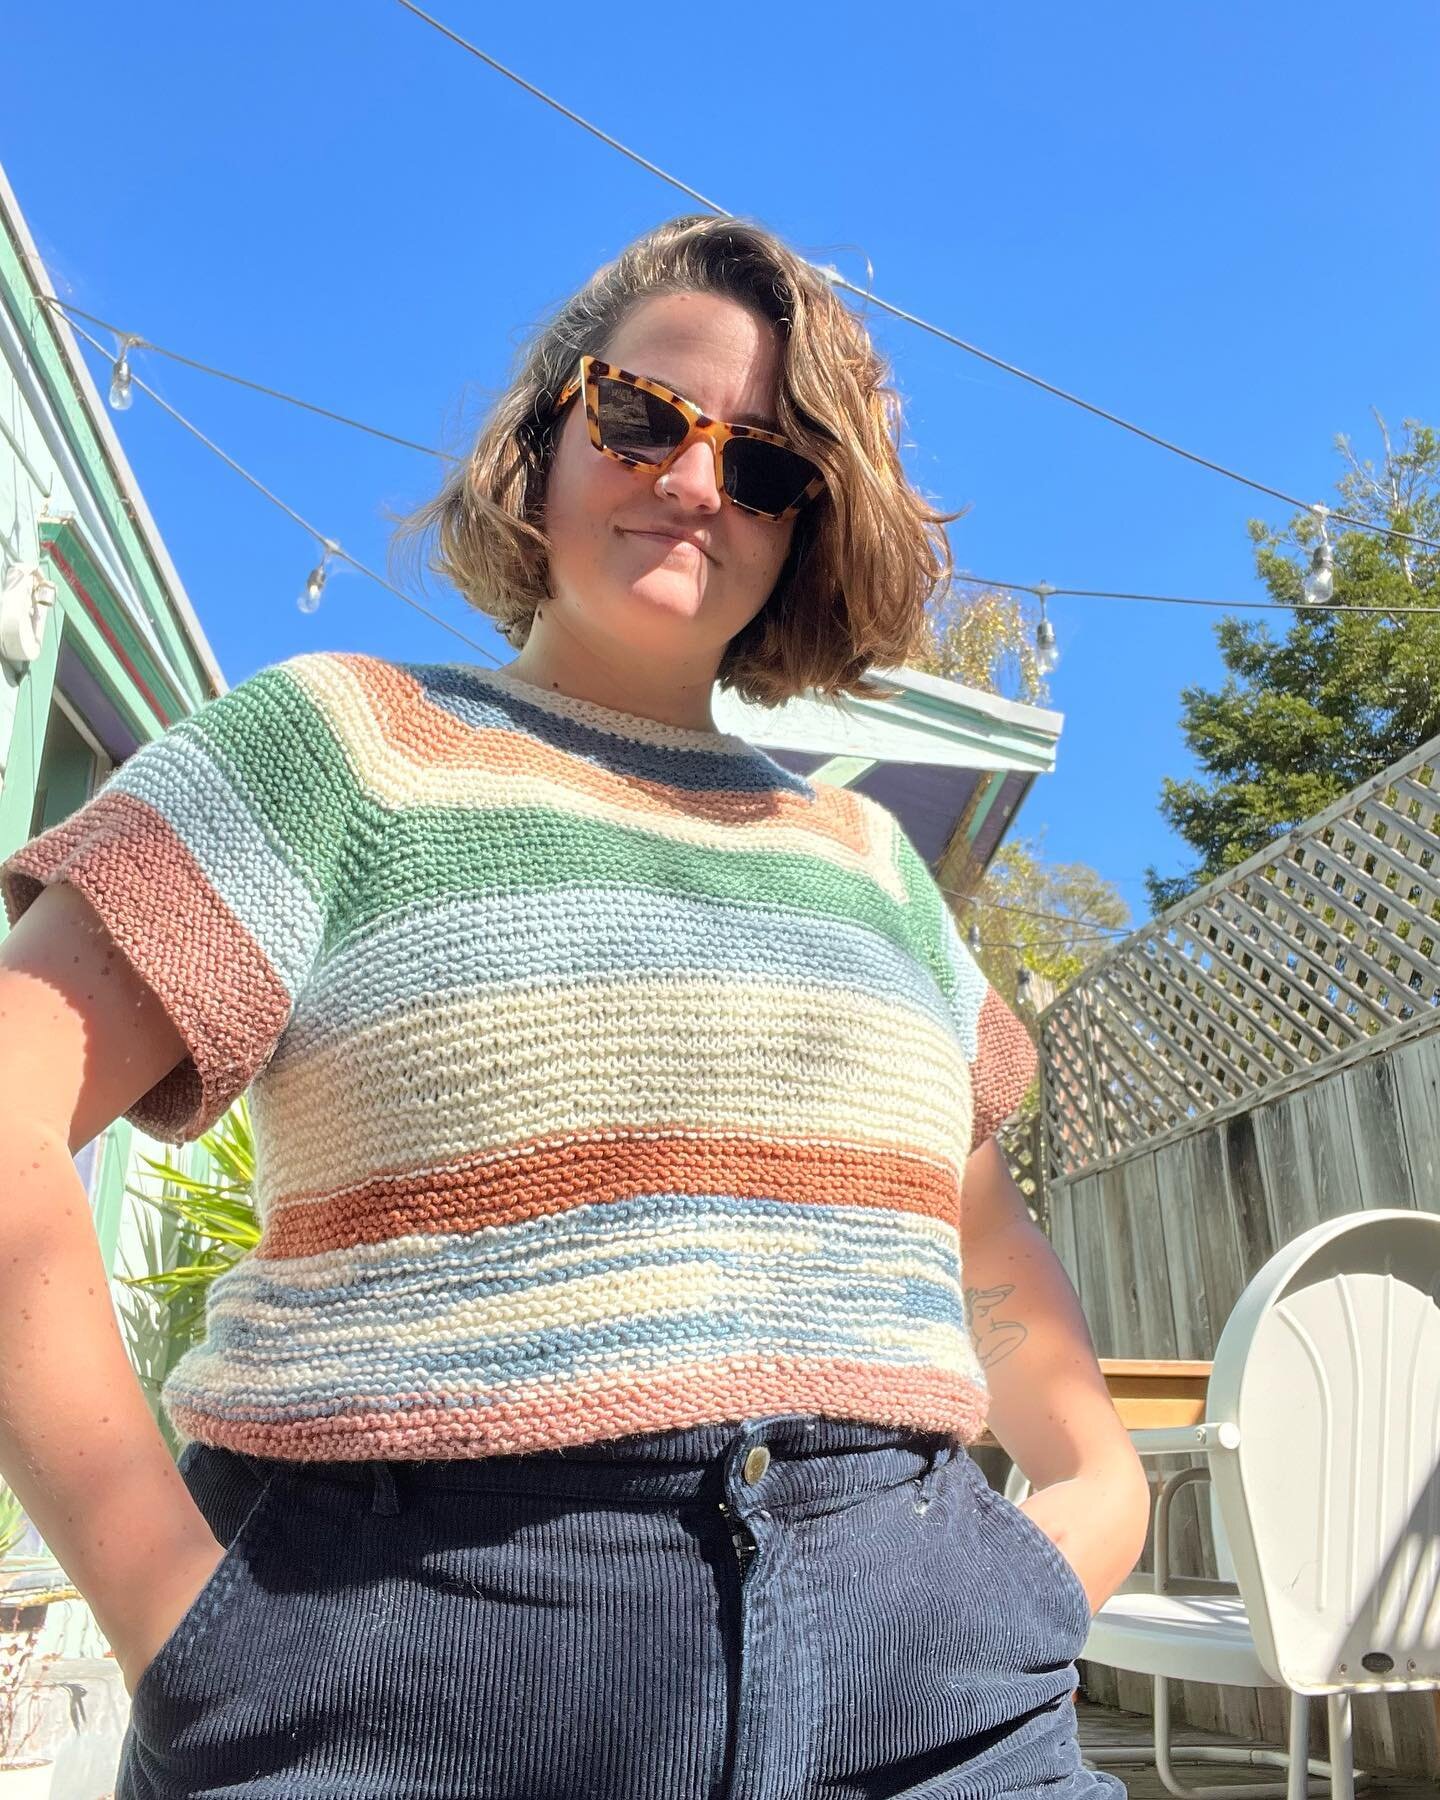 This is maybe my favorite thing I&rsquo;ve knit so far! I made it over the summer with some really squishy merino yarn. I couldn&rsquo;t find a pattern for a garter stitch tee so I drafted one to fit this yarn. I love how the colors make it feel a li